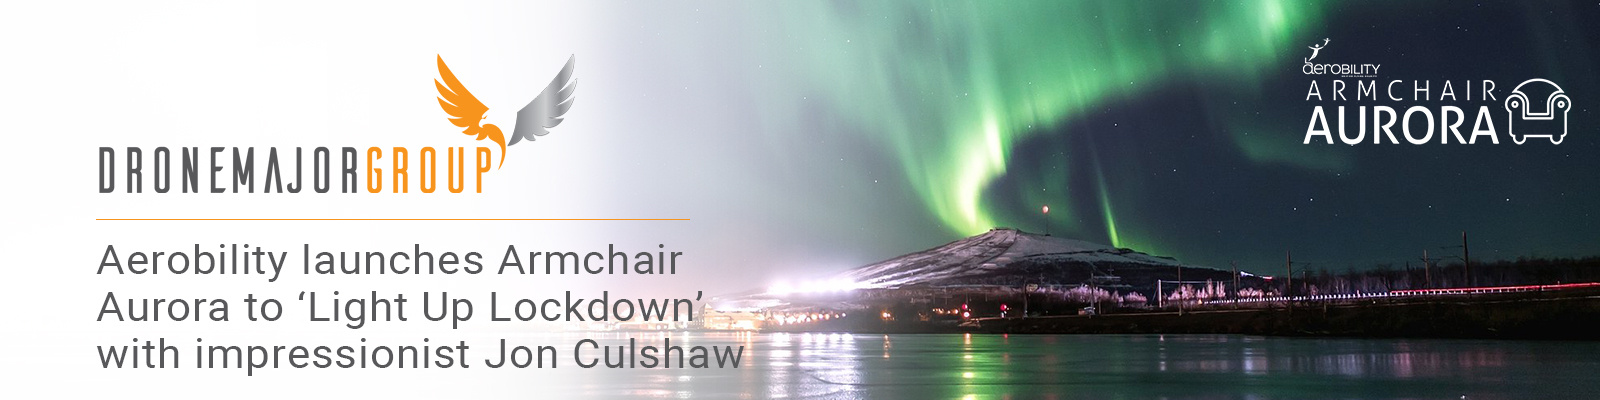 Aerobility launches Armchair Aurora to ‘Light Up Lockdown’ with impressionist Jon Culshaw